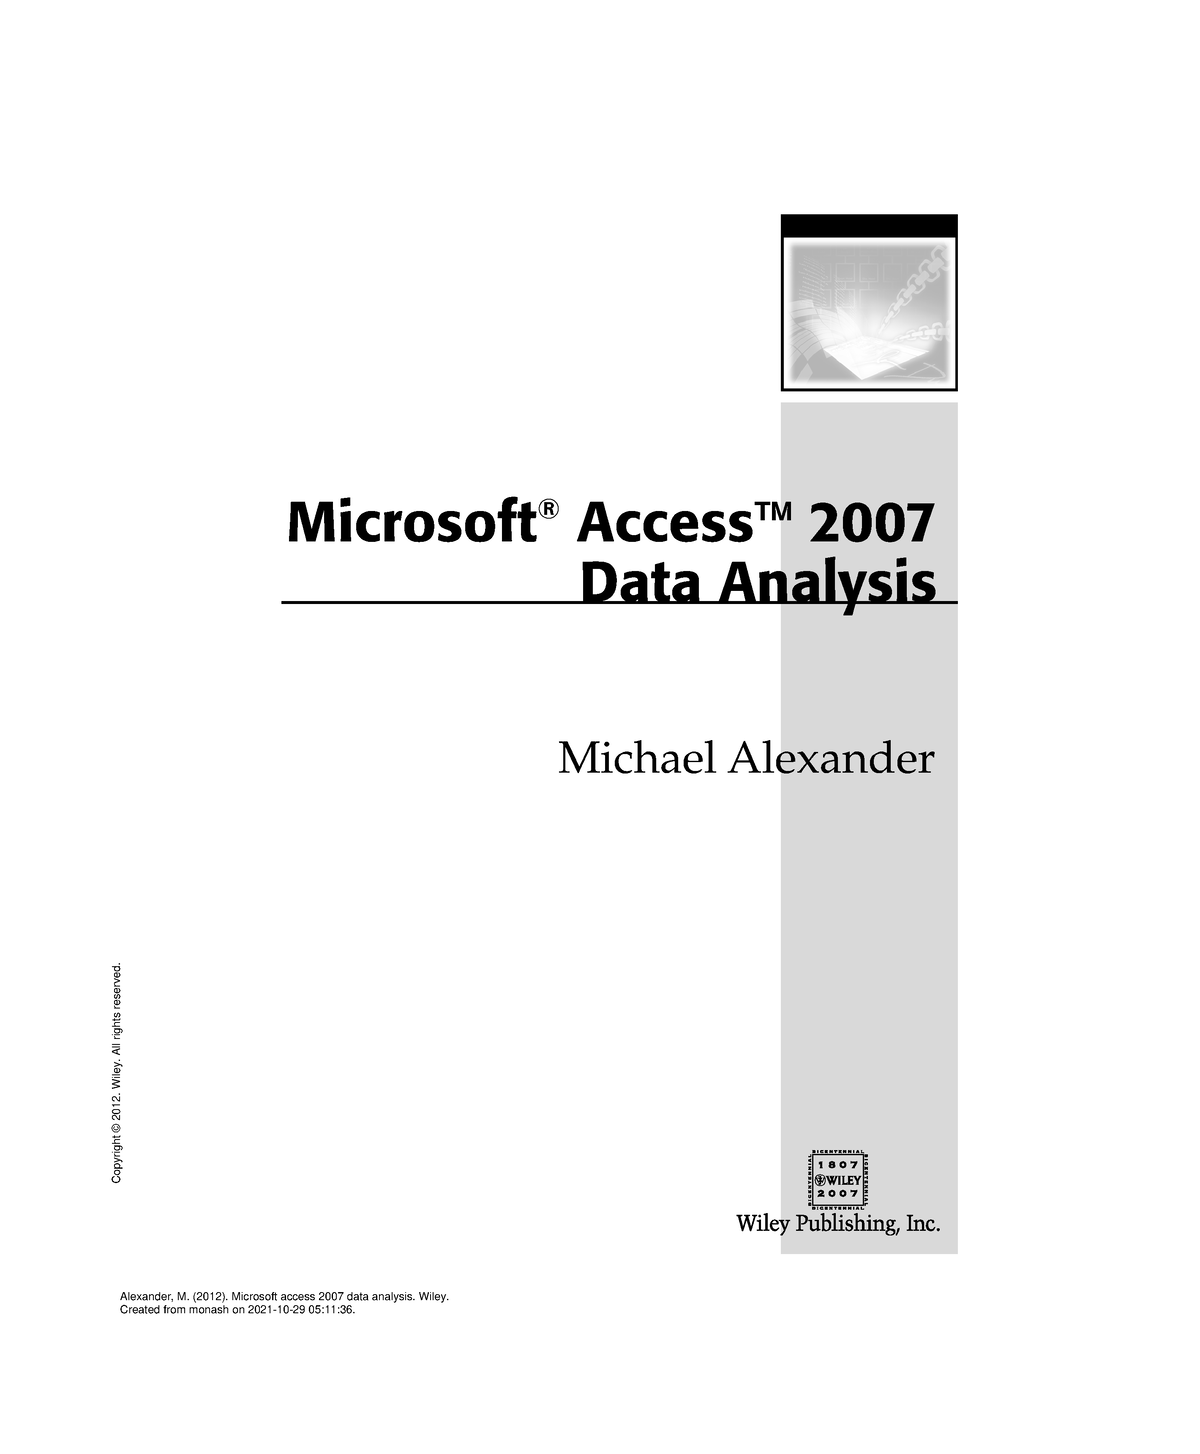 Microsoft Access 2007 Data Analysis Pages 1 To 27 Michael Alexander Microsoft ® Access 8964